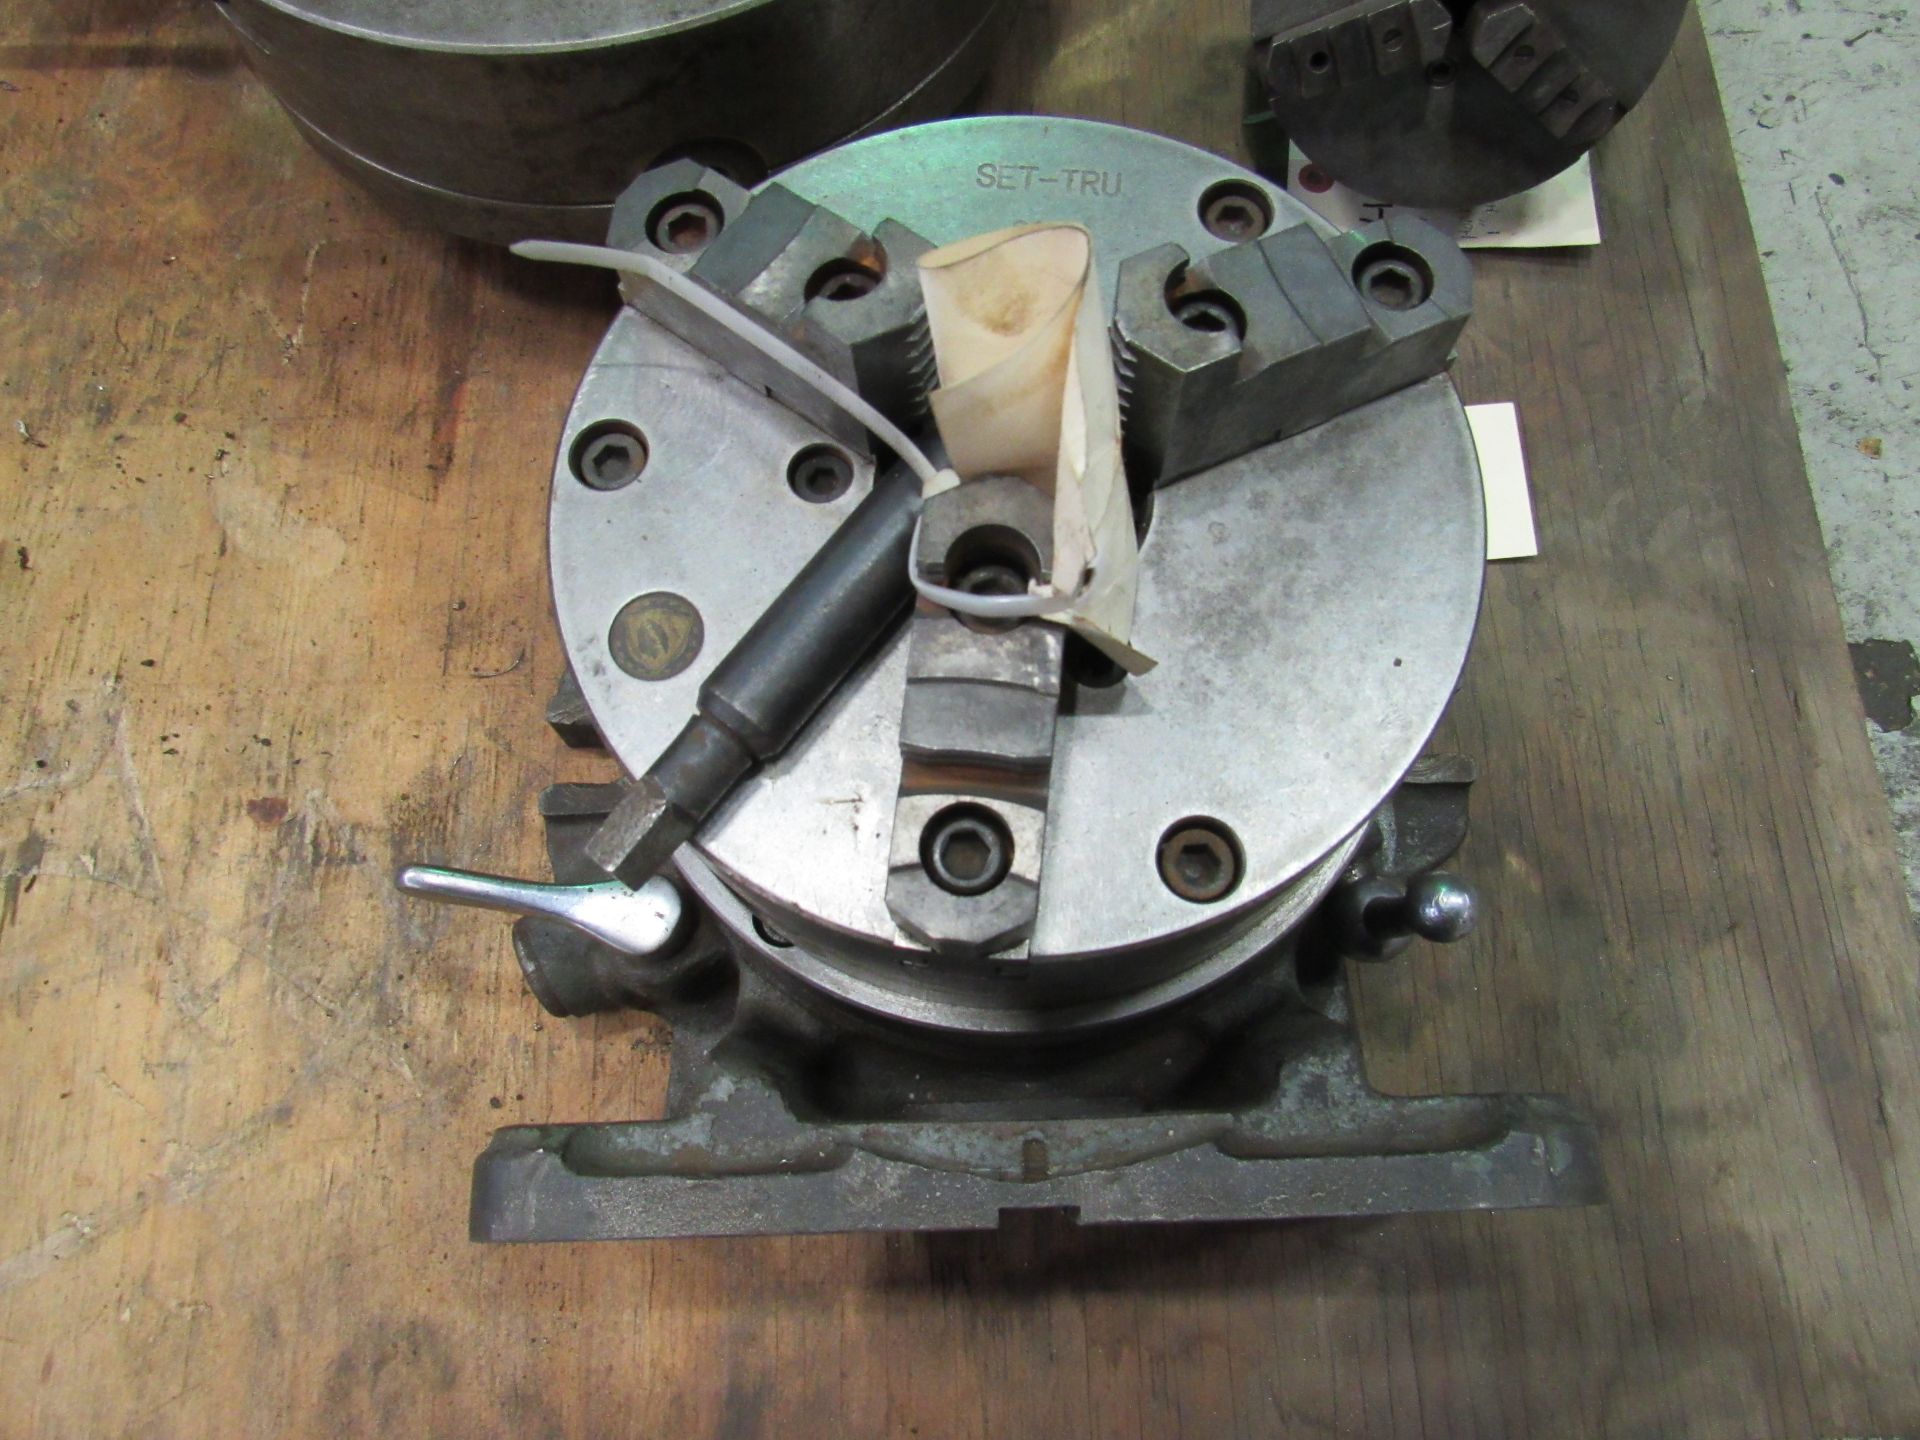 8" 3-Jaw Hartford Special Super Spacer Index Table, 8" dia. 3-jaw chuck, non-cumulative indexing - Image 4 of 5